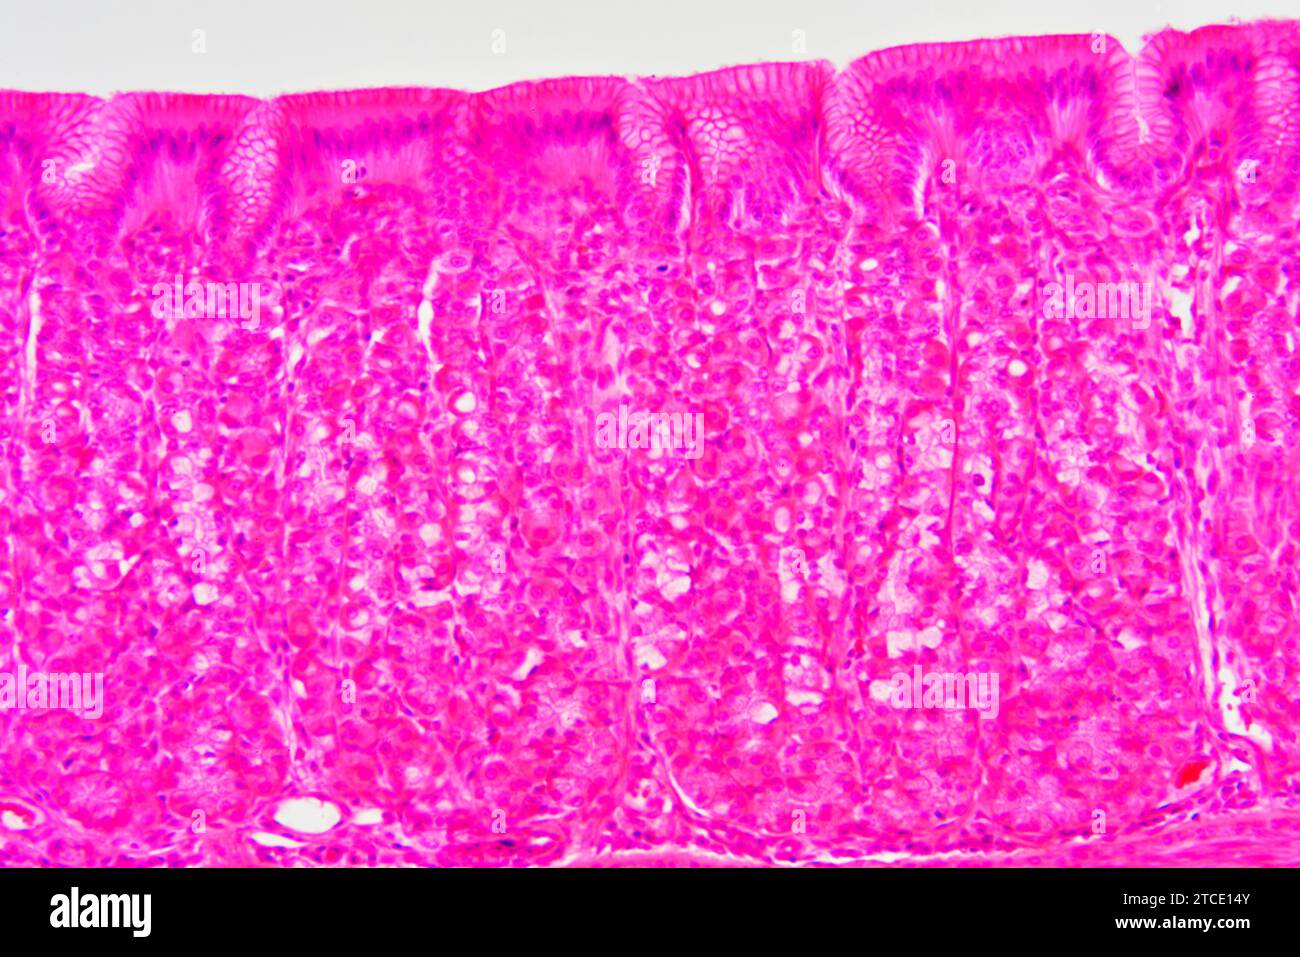 Stomach cross section showing mucosa, submucosa and gastric glands. Optical microscope X200. Stock Photo